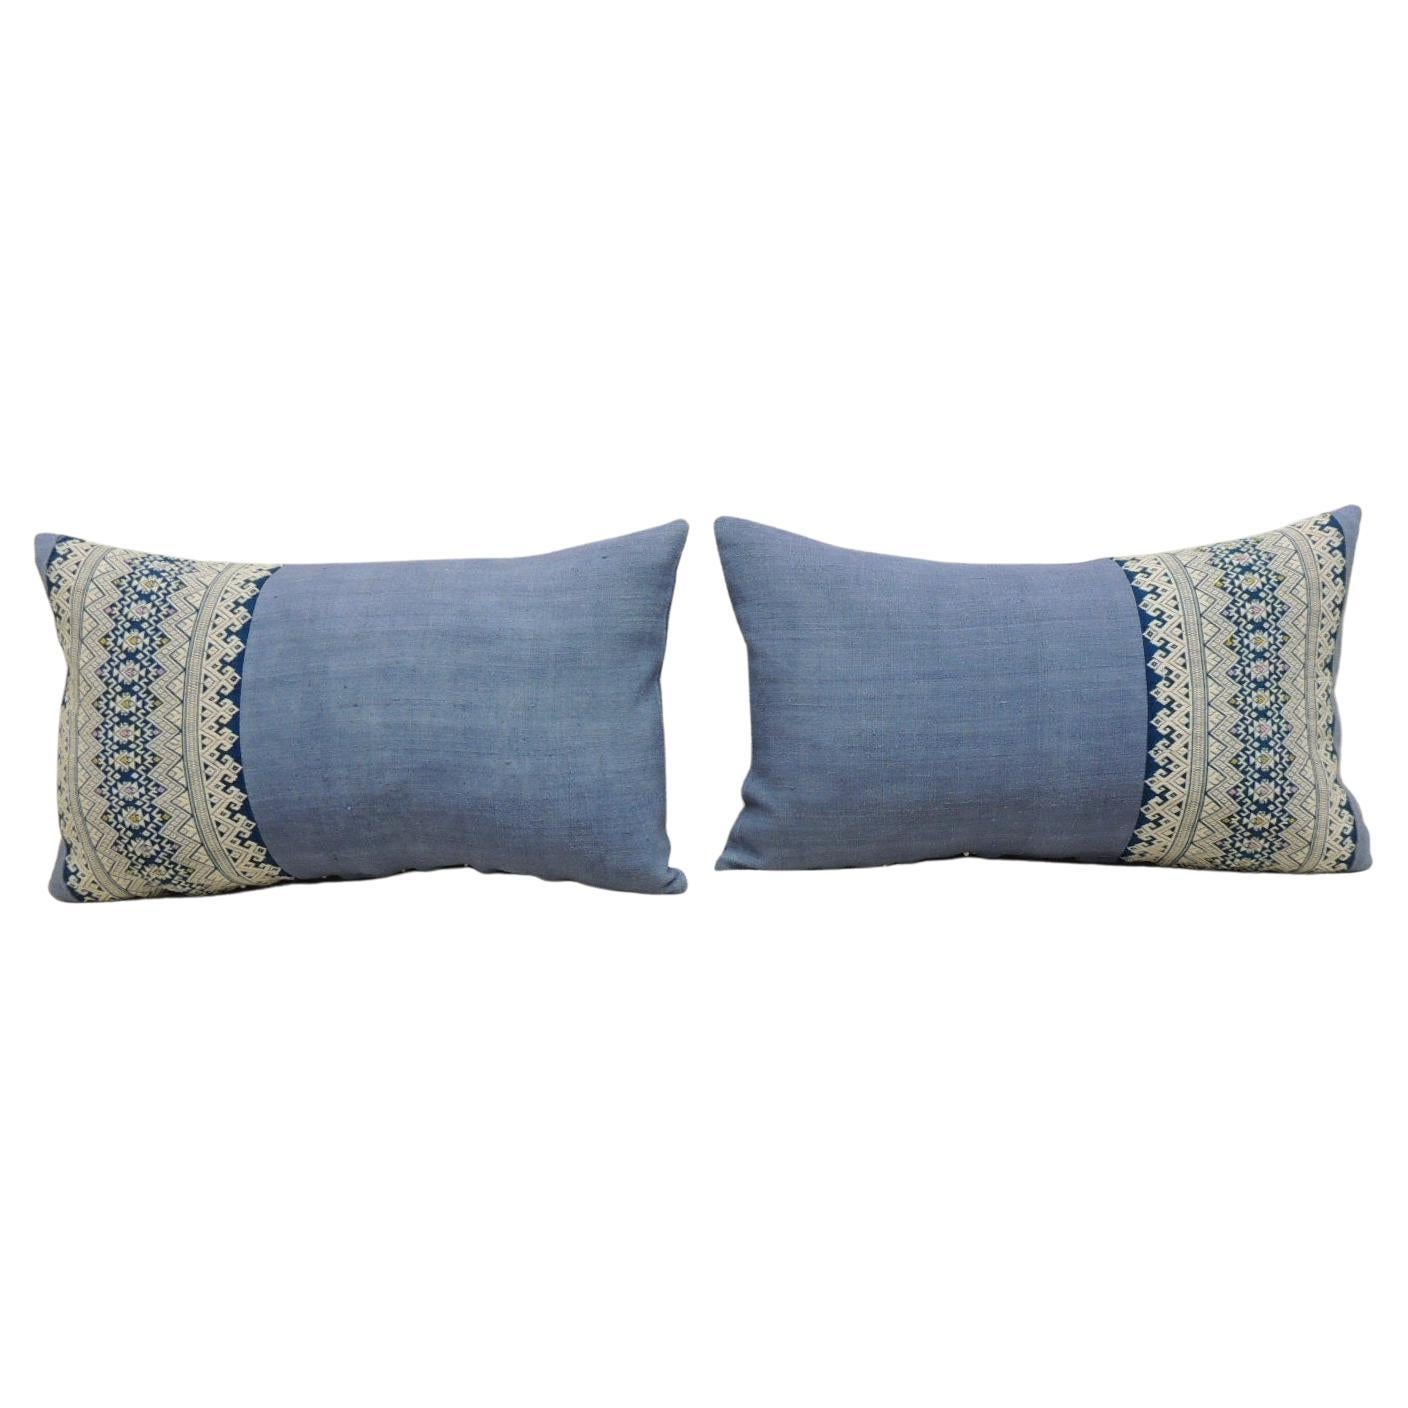 Pair of Vintage Blue and White Asian Decorative Lumbar Pillows